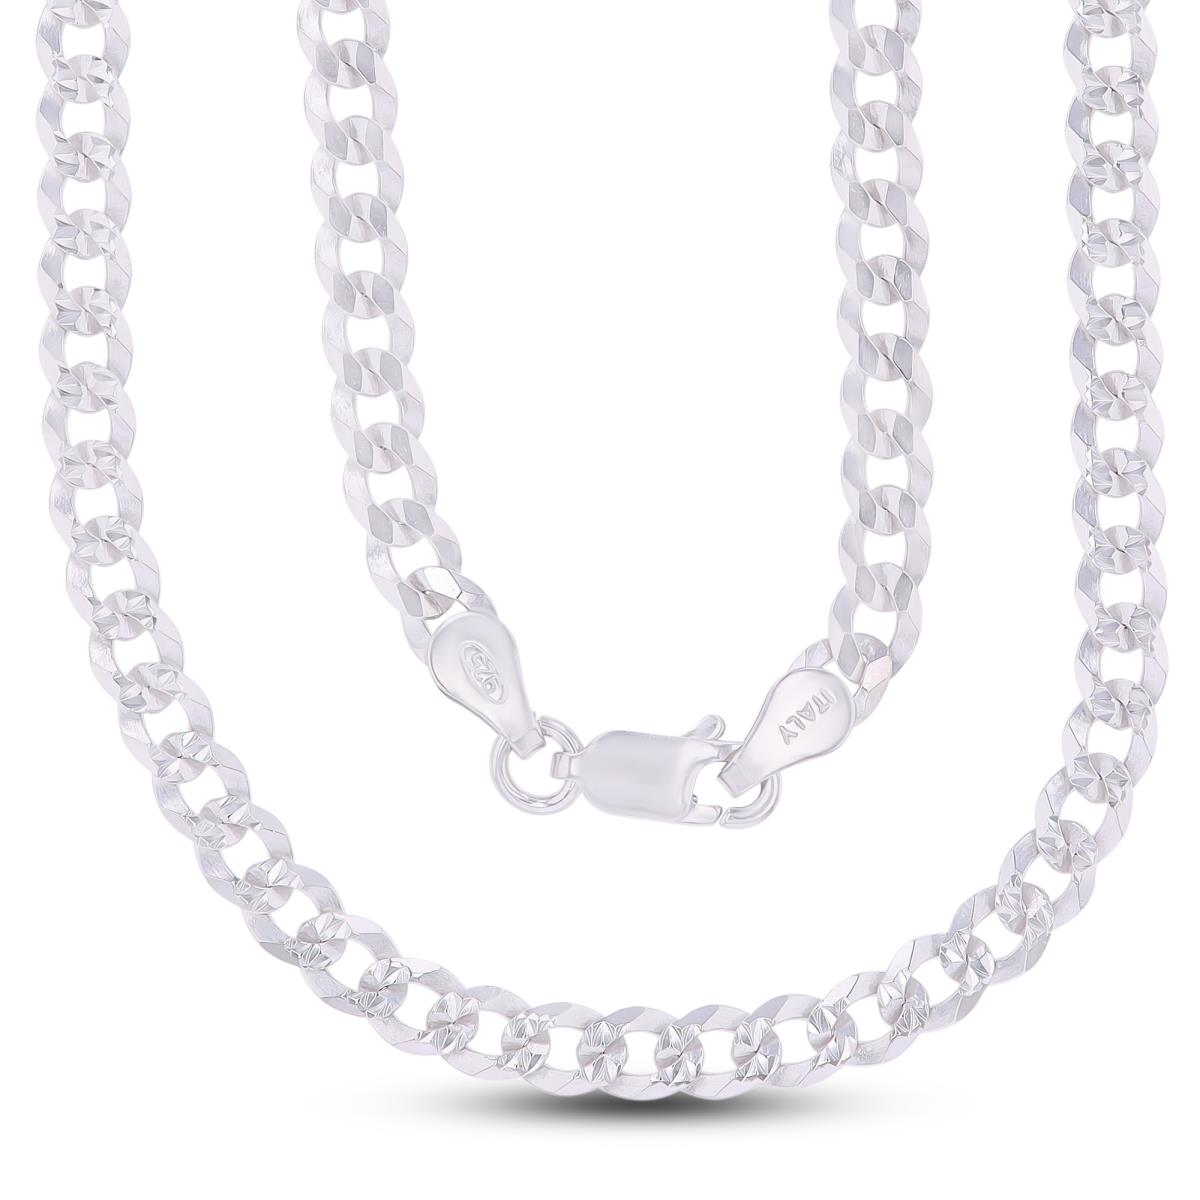 Sterling Silver Anti-Tarnish DC 4mm 100 Curb Pave 20"Chain 